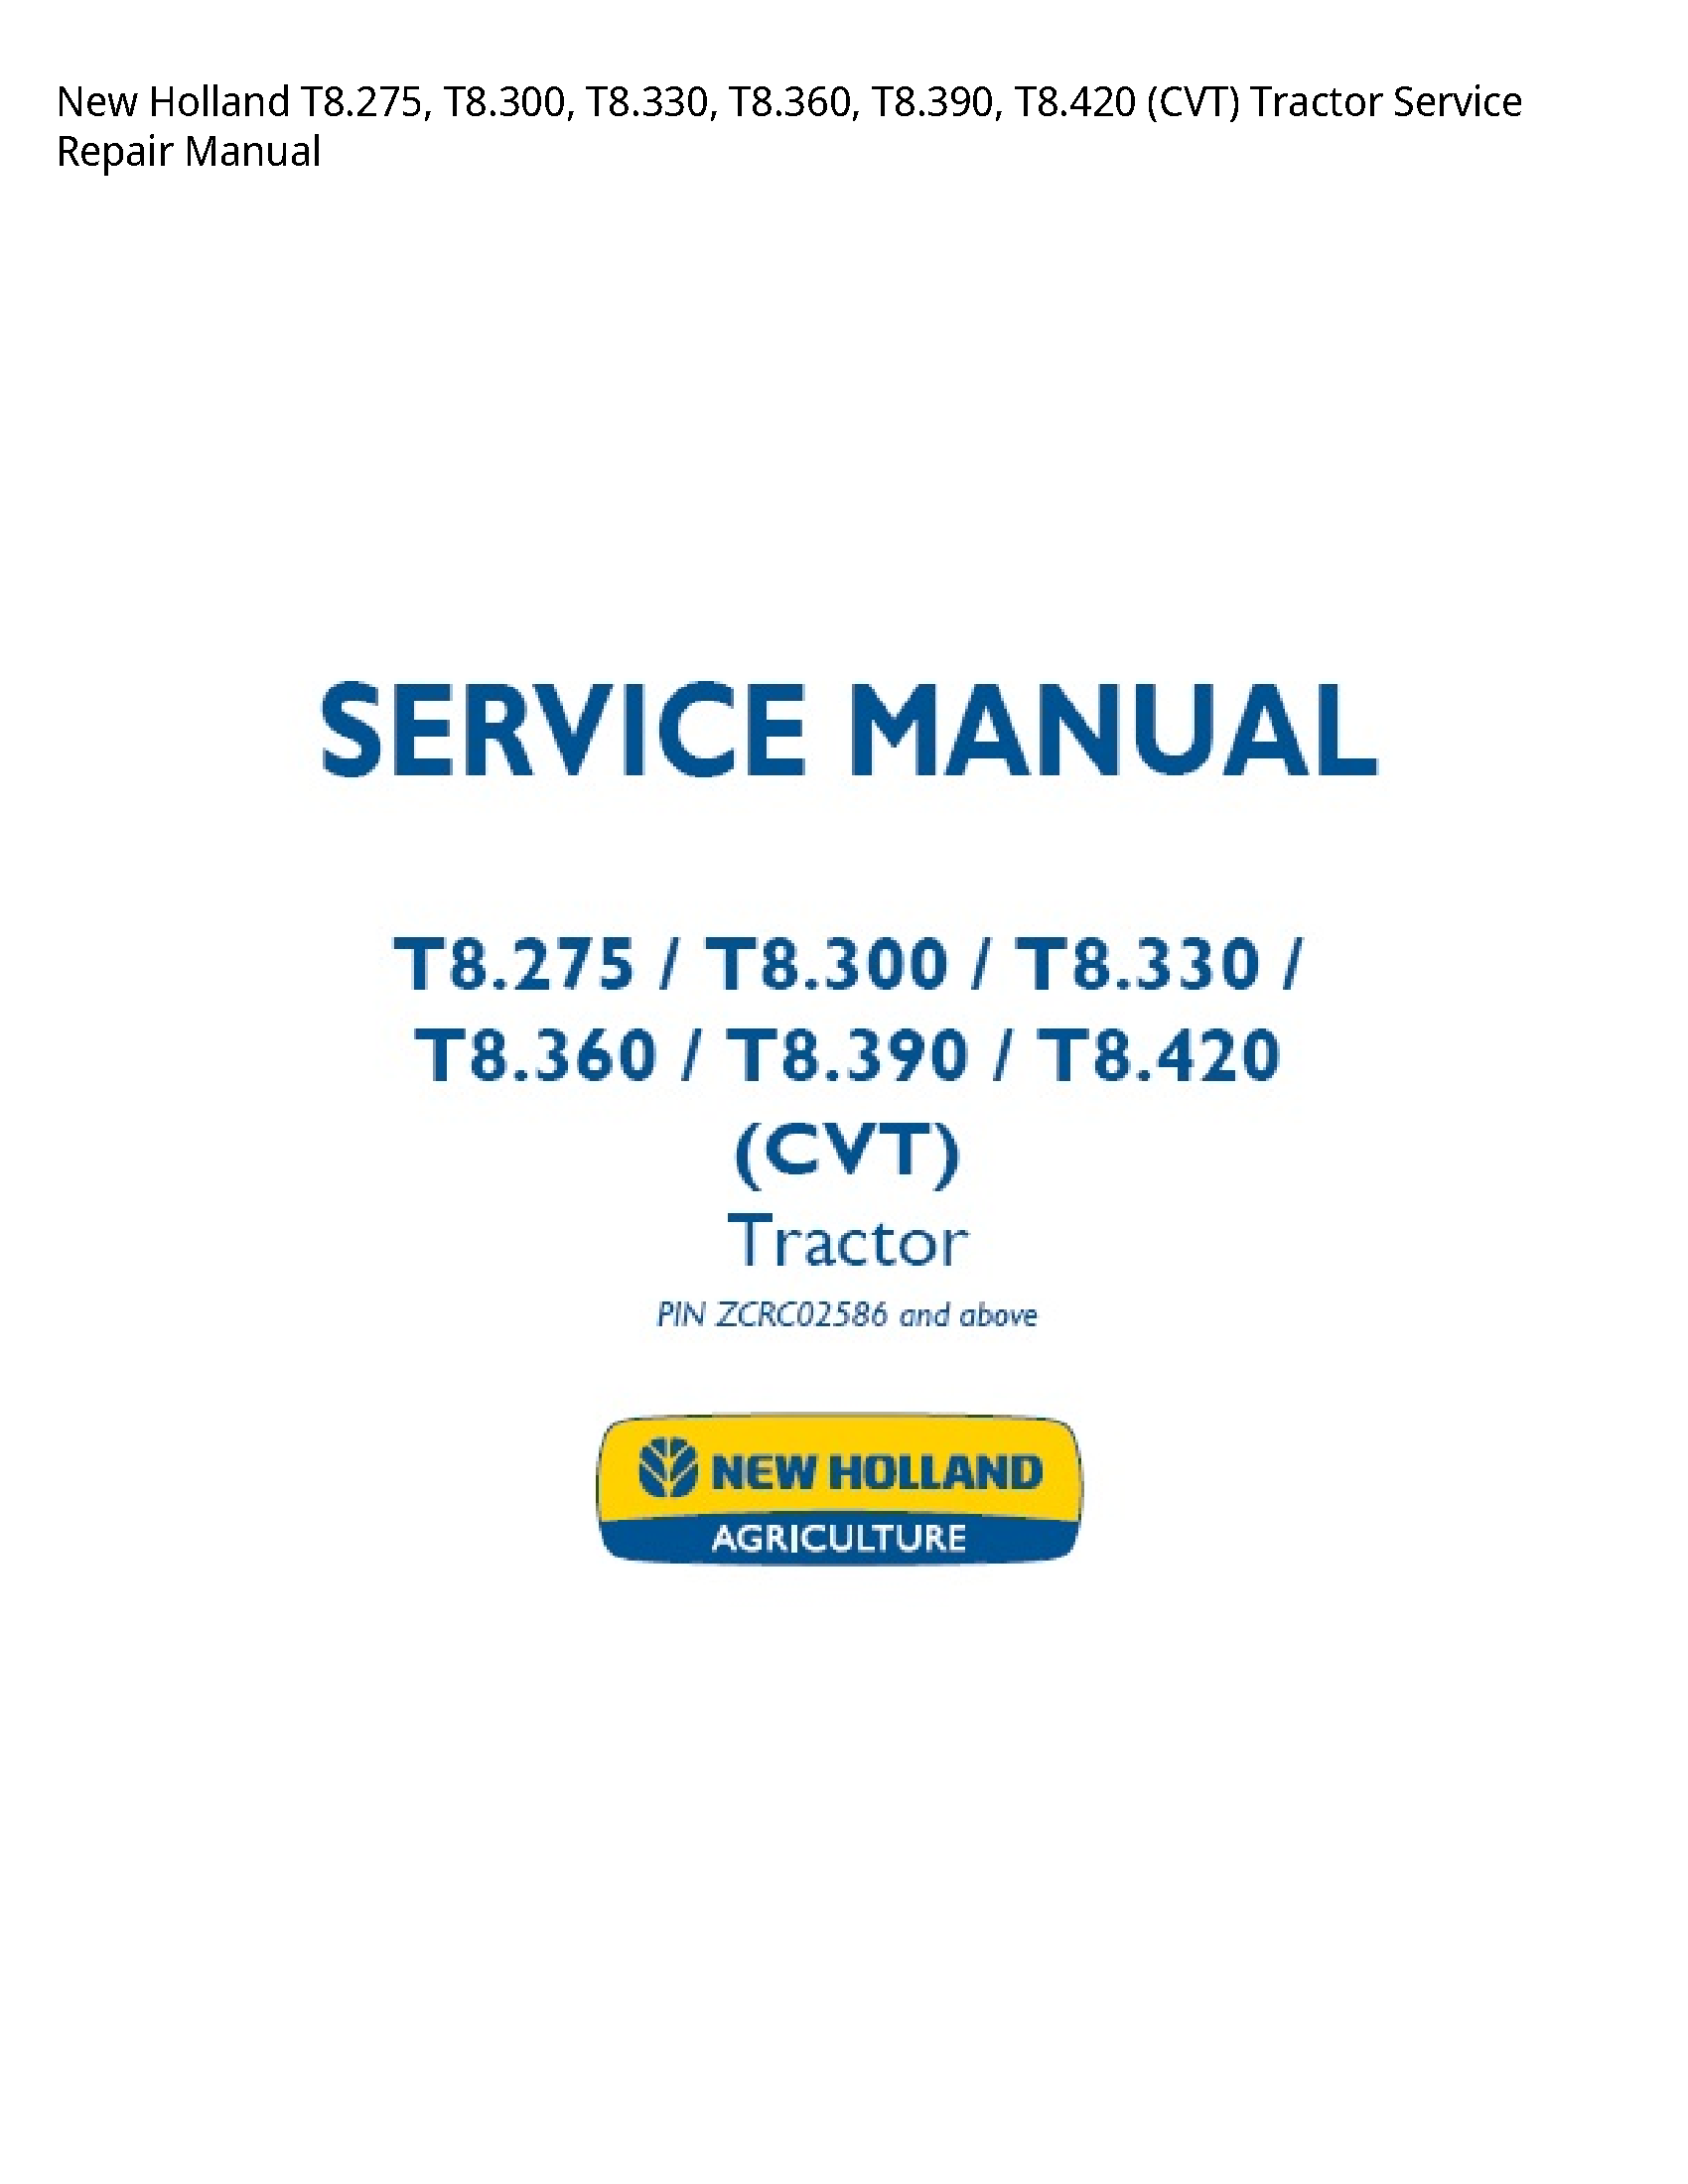 New Holland T8.275 (CVT) Tractor manual